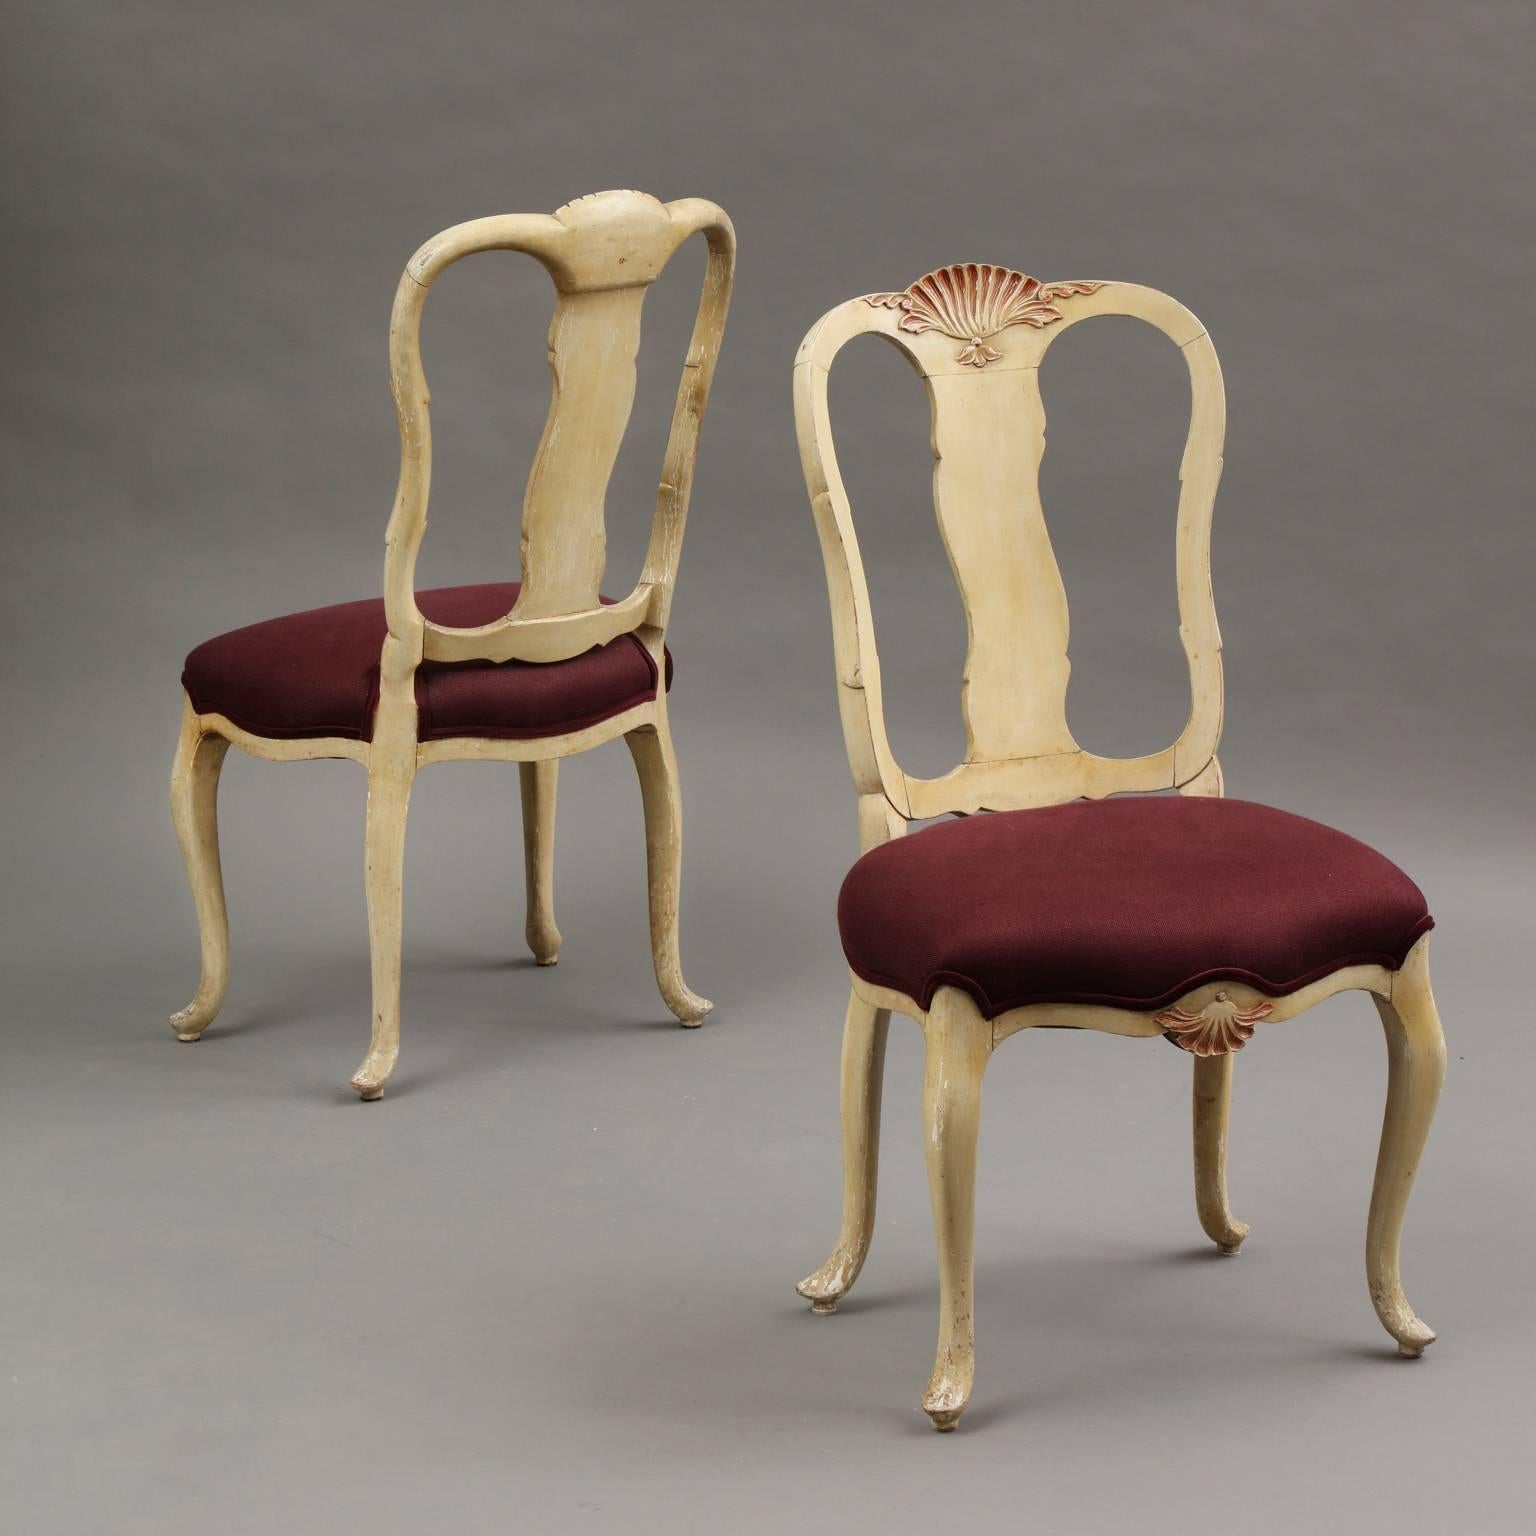 Syrie Maugham (1879-1955)
Pair of splat-back Queen Anne style side chairs in ivory painted wood with pale pink carved shell and scroll decoration. Raised on cabriole legs with pad feet. Upholstered in burgundy linen with velvet welt trim.
English,